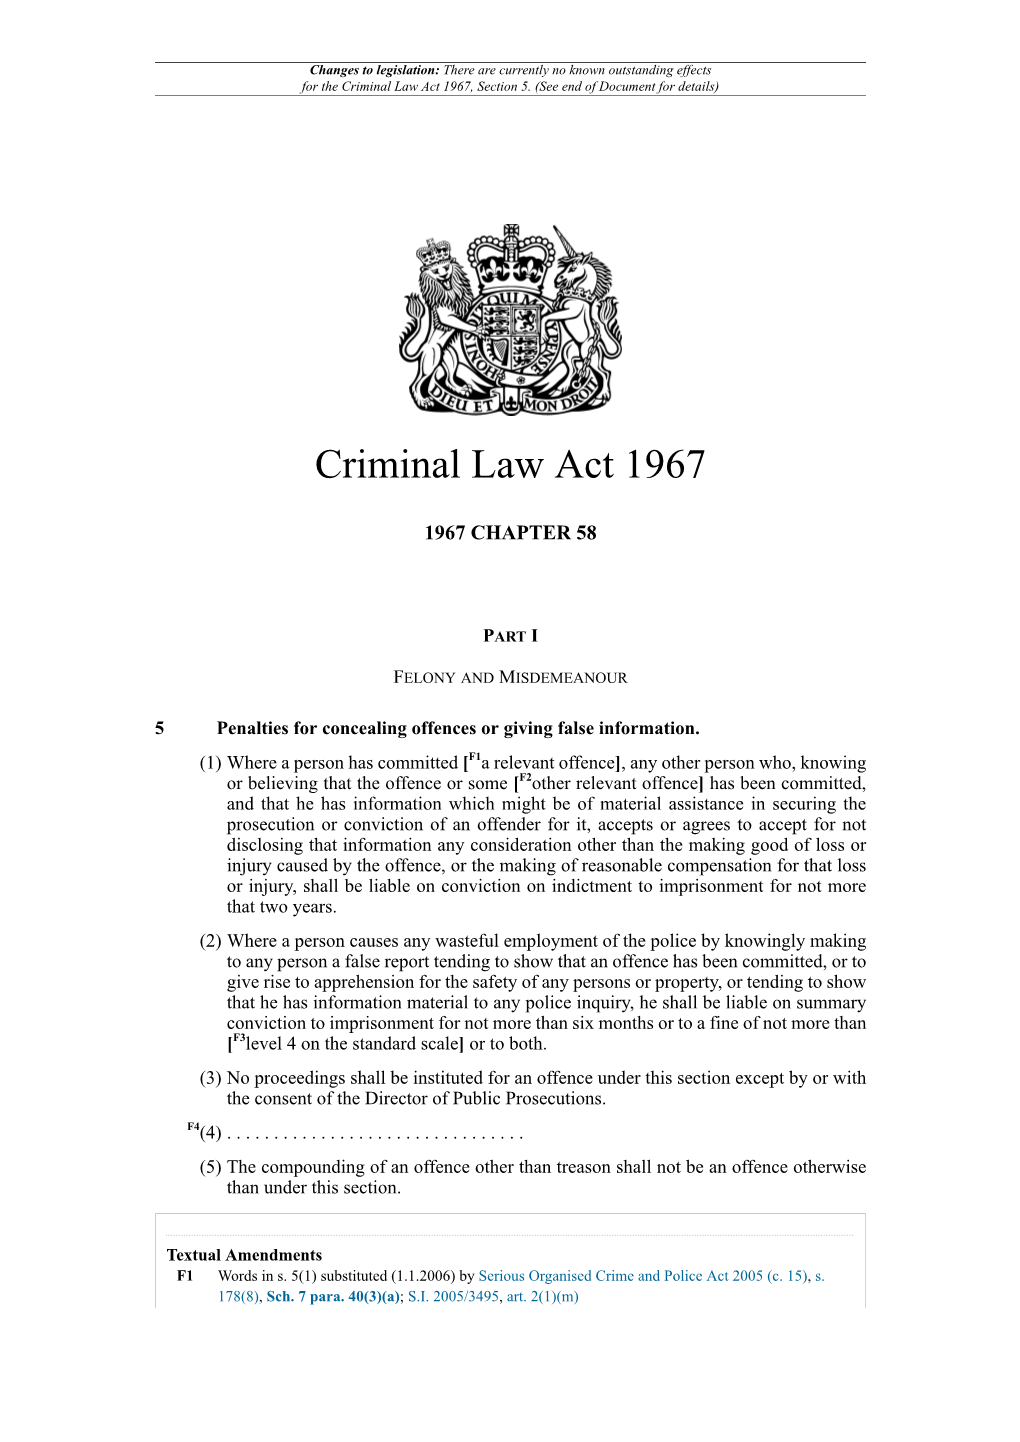 Criminal Law Act 1967, Section 5